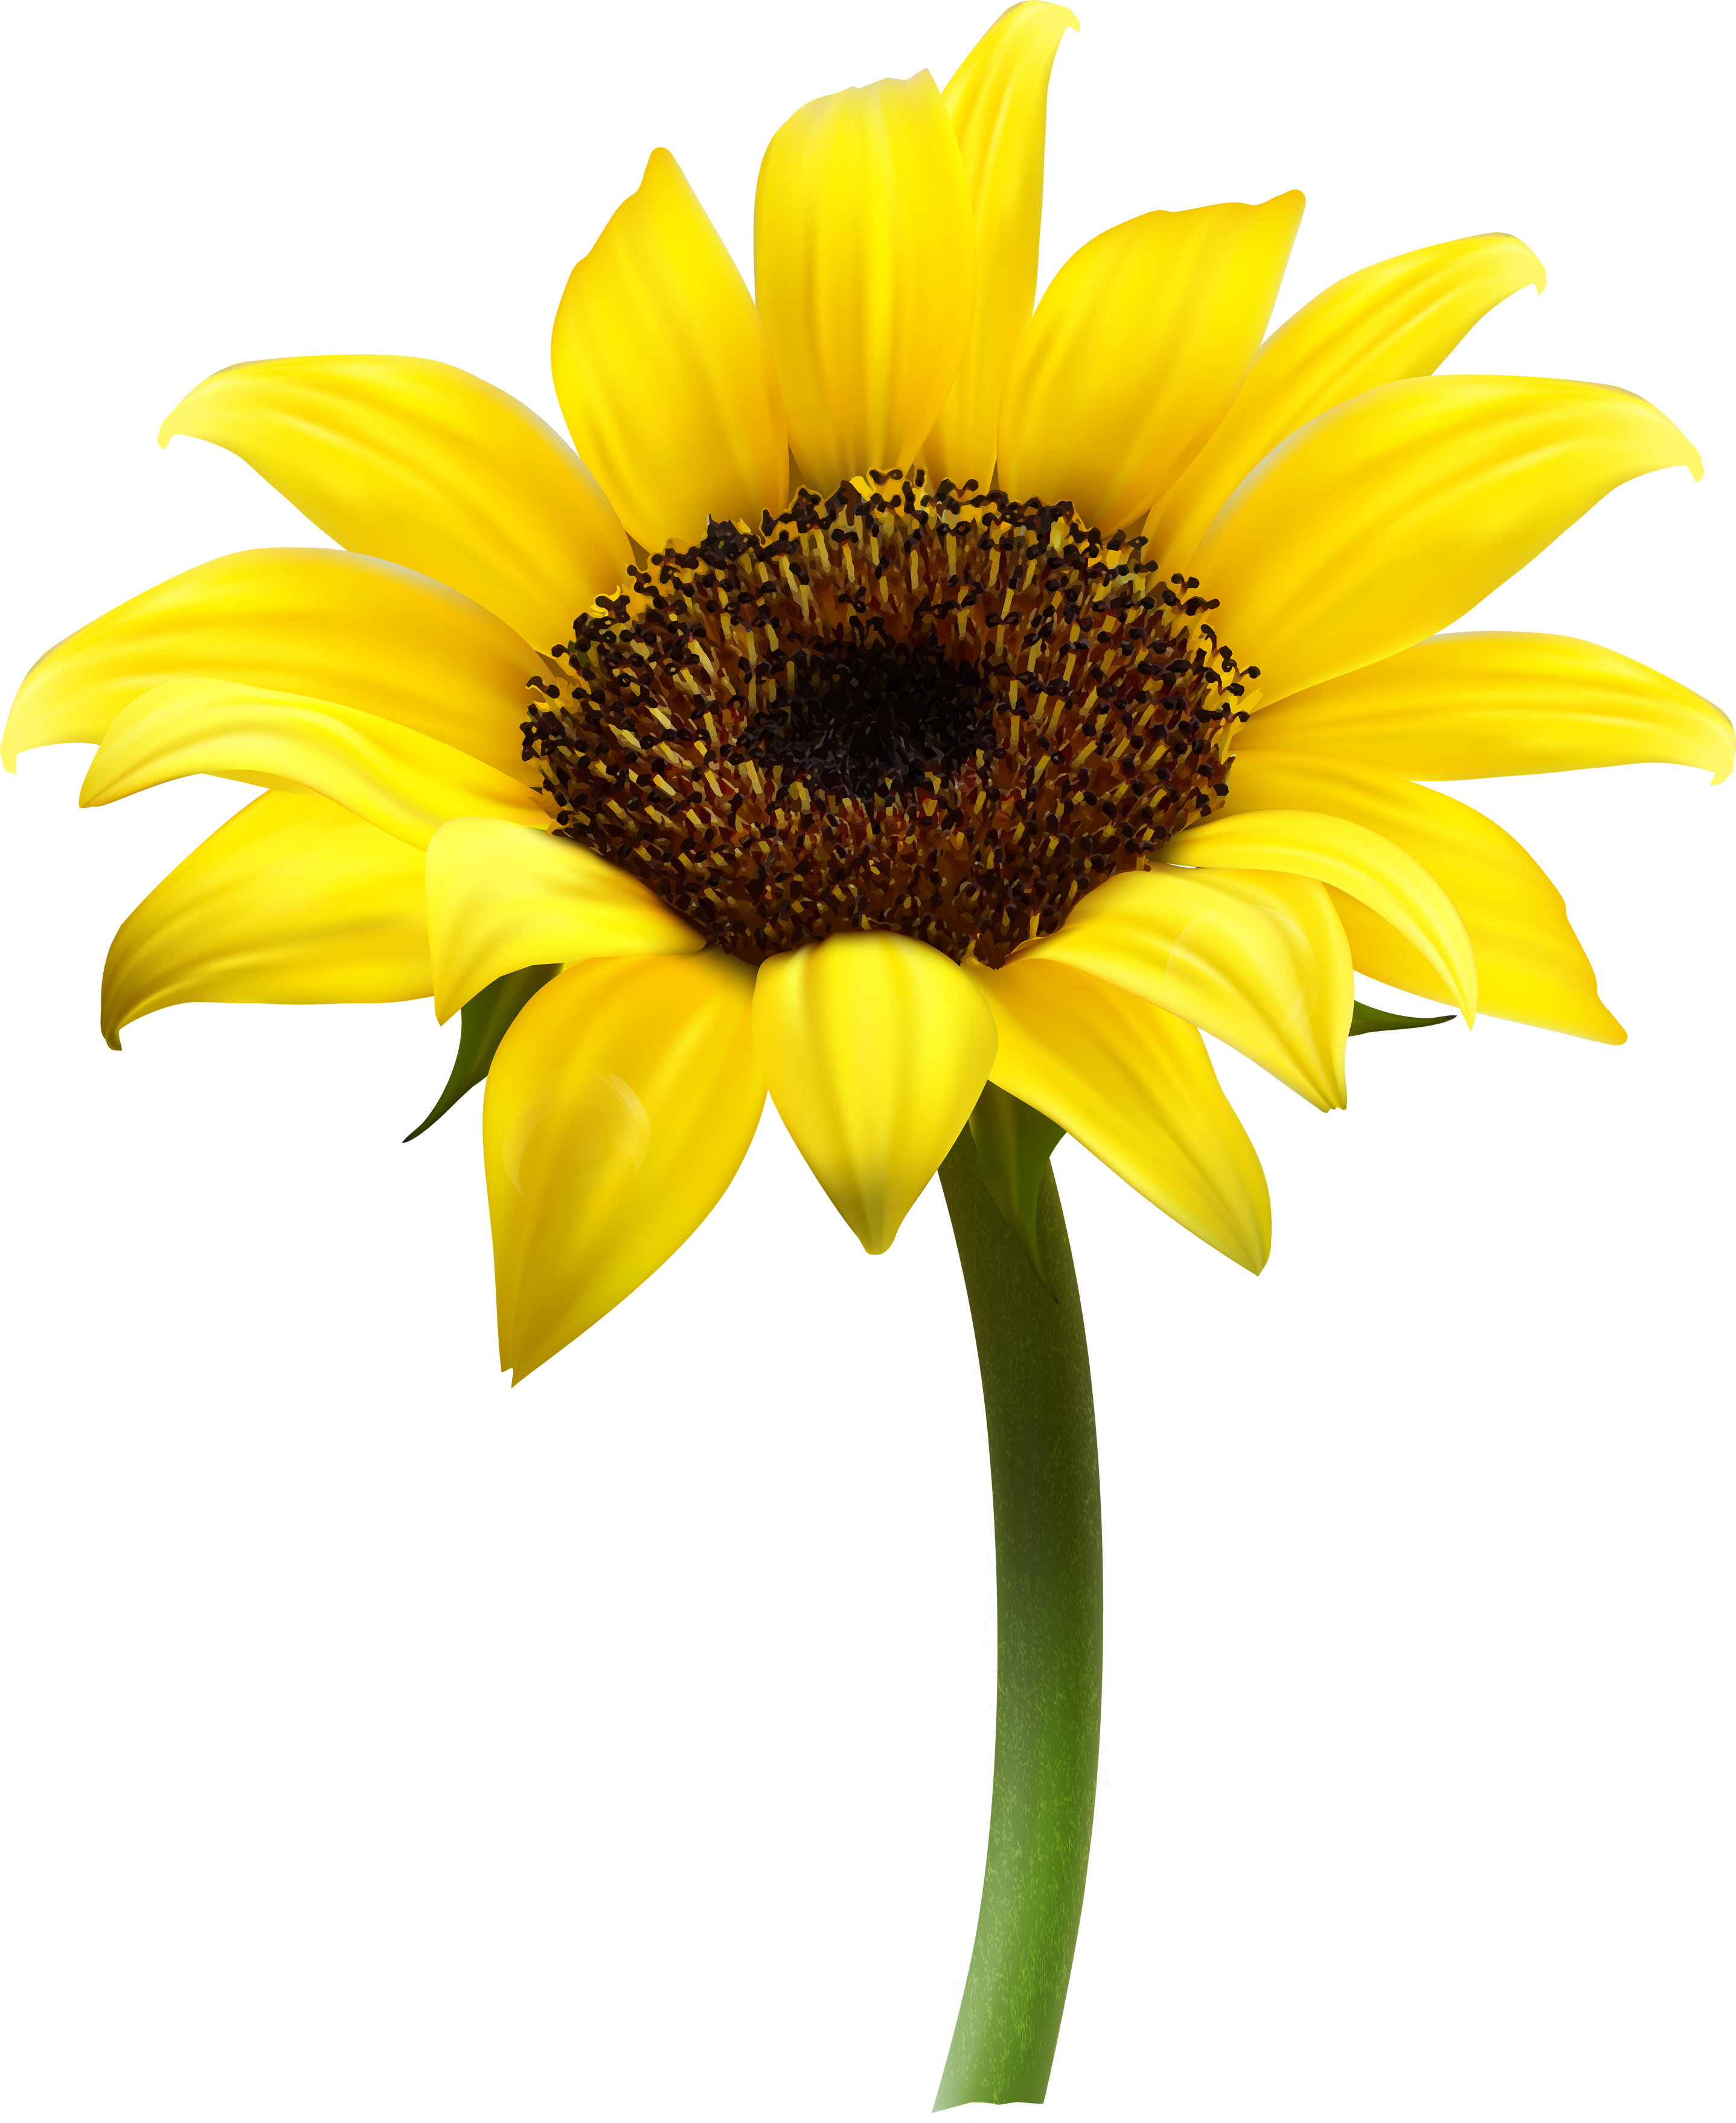 Sunflower PNG images free download.